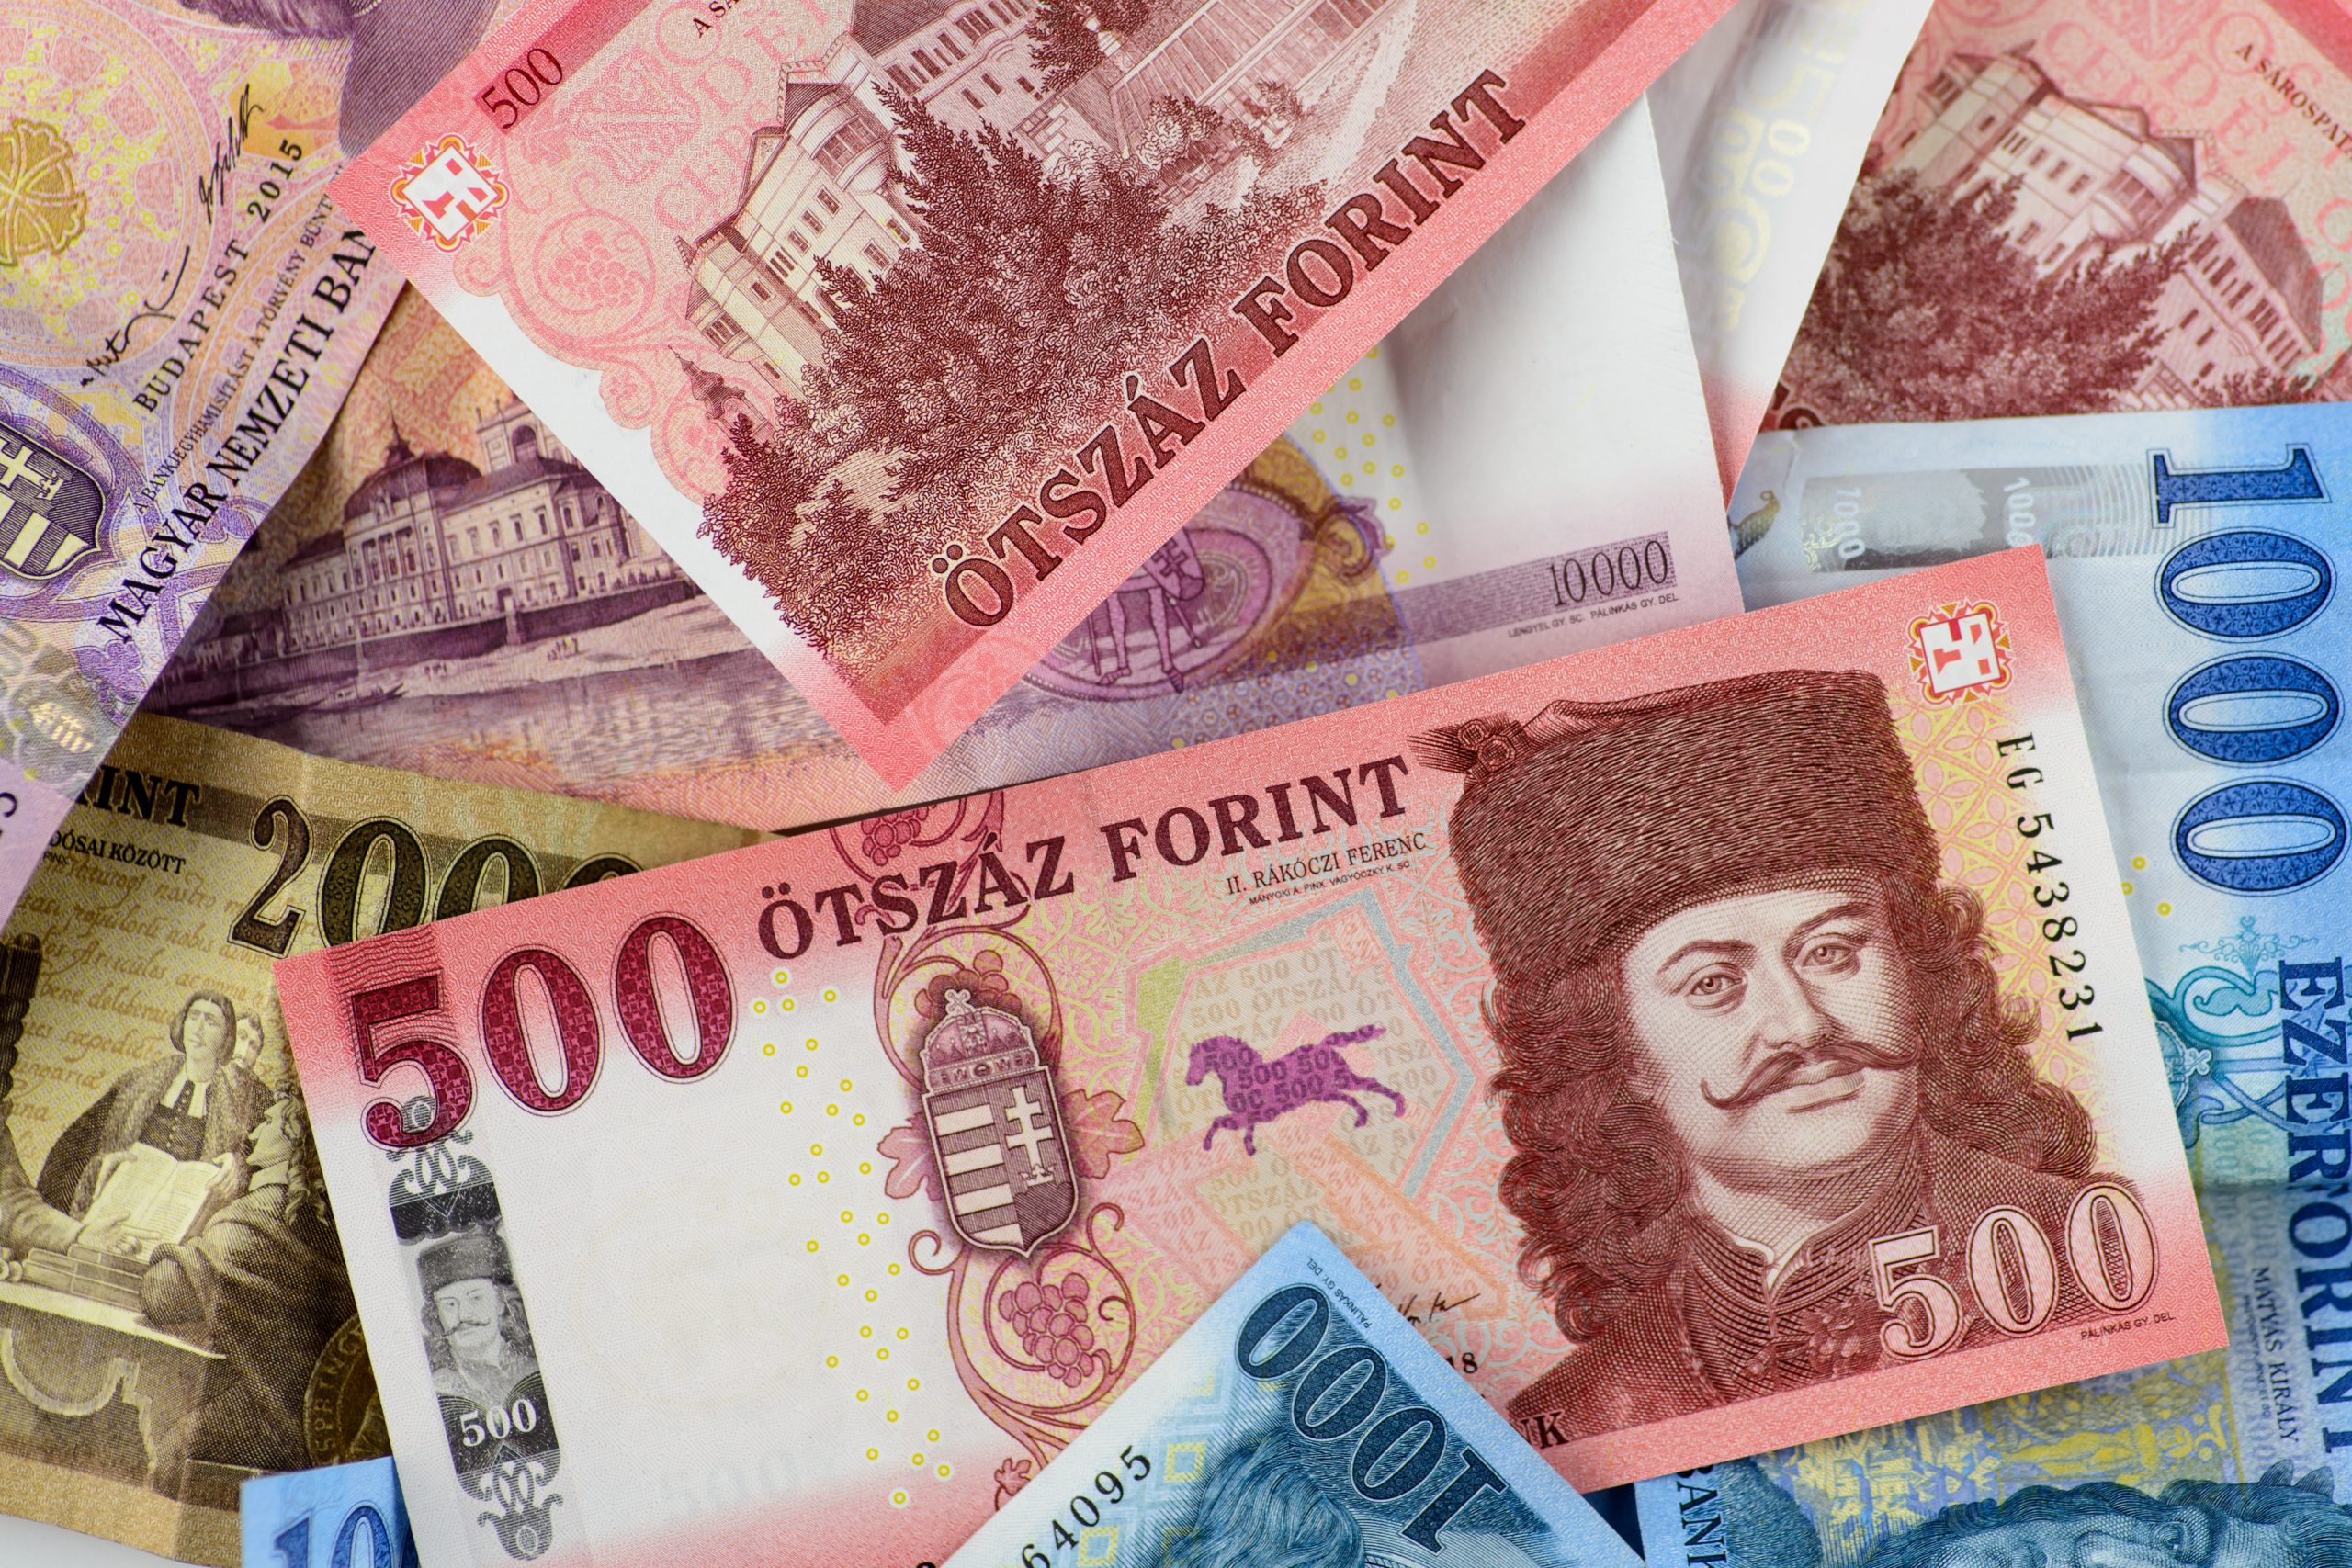 These banknotes were in the first 75 years of the forint